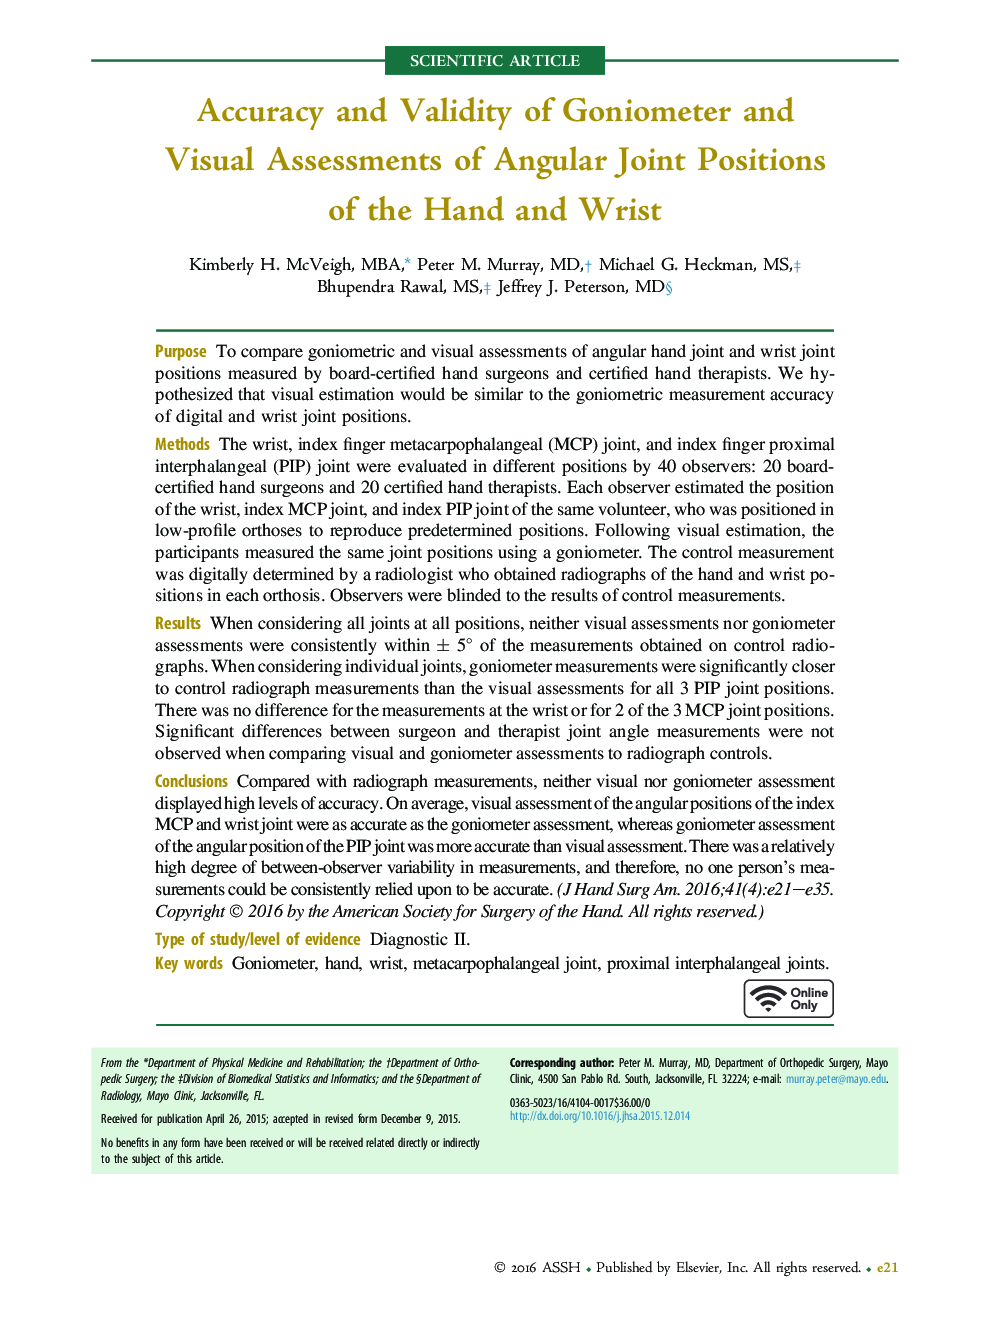 Accuracy and Validity of Goniometer and Visual Assessments of Angular Joint Positions of the Hand and Wrist 